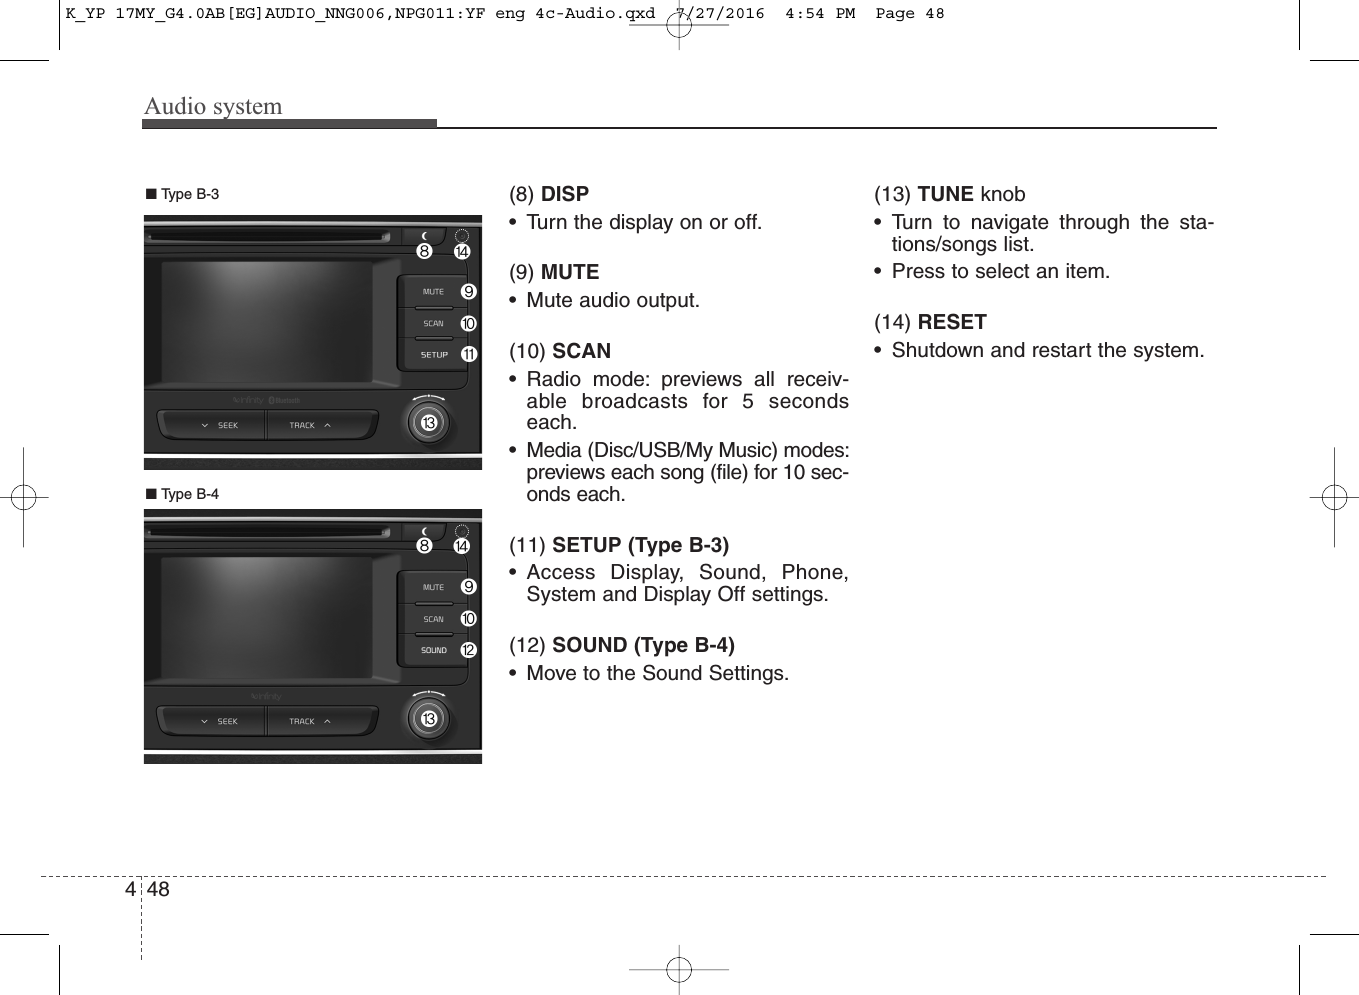 Audio system448(8) DISP• Turn the display on or off.(9) MUTE• Mute audio output.(10) SCAN• Radio mode: previews all receiv-able broadcasts for 5 secondseach.• Media (Disc/USB/My Music) modes:previews each song (file) for 10 sec-onds each.(11) SETUP (Type B-3)• Access Display, Sound, Phone,System and Display Off settings.(12) SOUND (Type B-4)• Move to the Sound Settings.(13) TUNE knob • Turn to navigate through the sta-tions/songs list.• Press to select an item.(14) RESET• Shutdown and restart the system.■ Type B-4■ Type B-3K_YP 17MY_G4.0AB[EG]AUDIO_NNG006,NPG011:YF eng 4c-Audio.qxd  7/27/2016  4:54 PM  Page 48